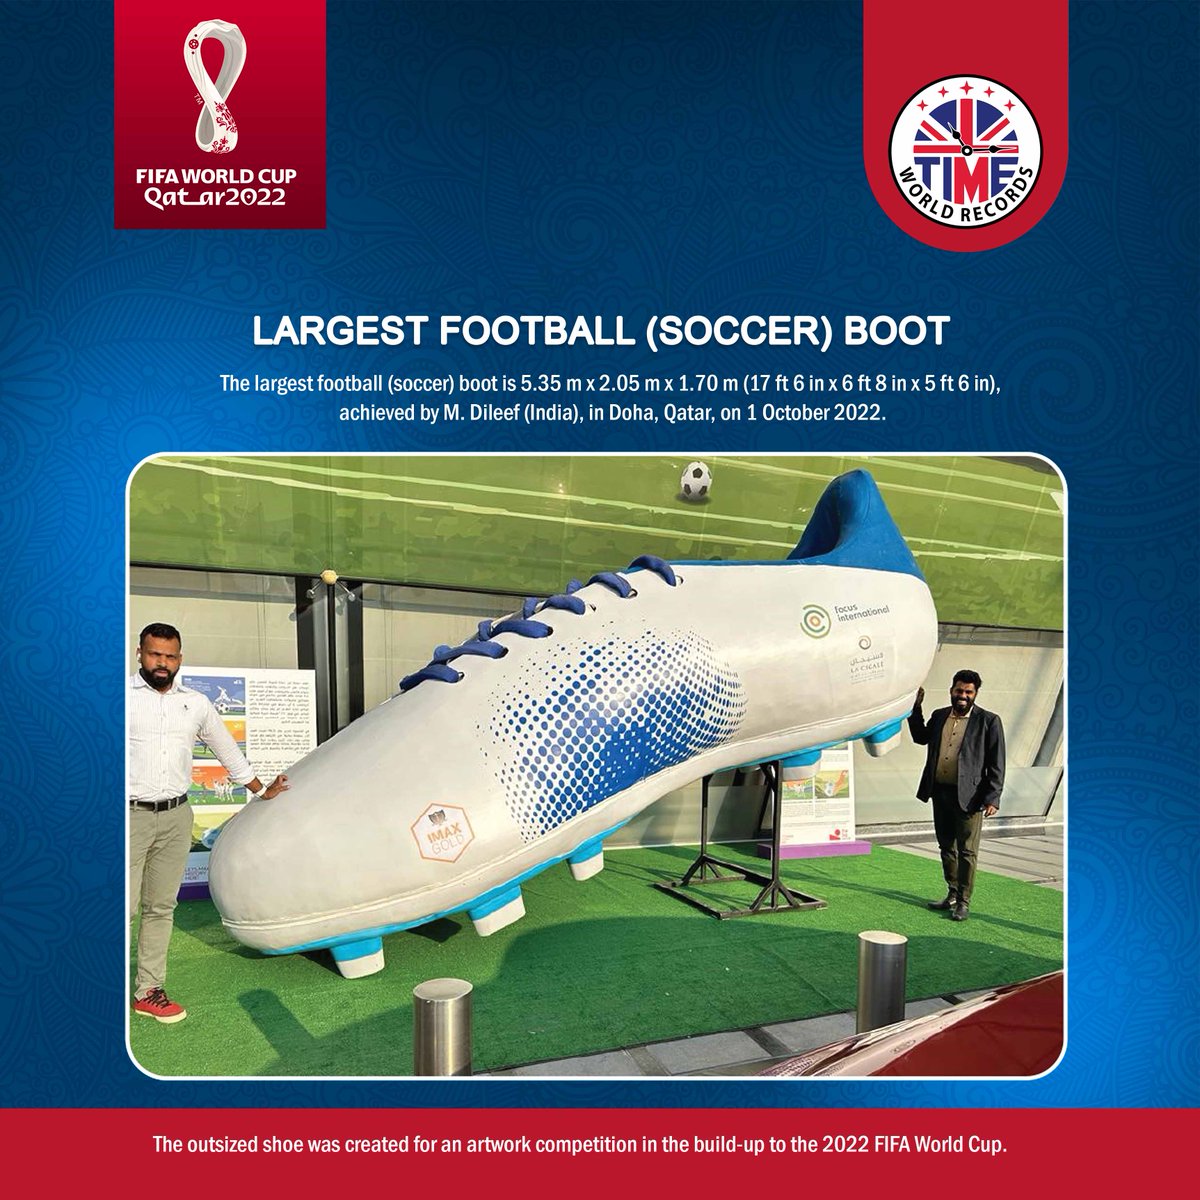 World's Largest Soccer boot. It displayed on FIFA World Cup in Qatar 2022
#timeworldrecords#arabianworldrecords#worldrecordattempt#officialAttempt#uknews#UAENews#worldwide#worldrecordattempt #worldrecordbreaker
#djobiworldrecord #realworldrecords #worldrecordstoreday